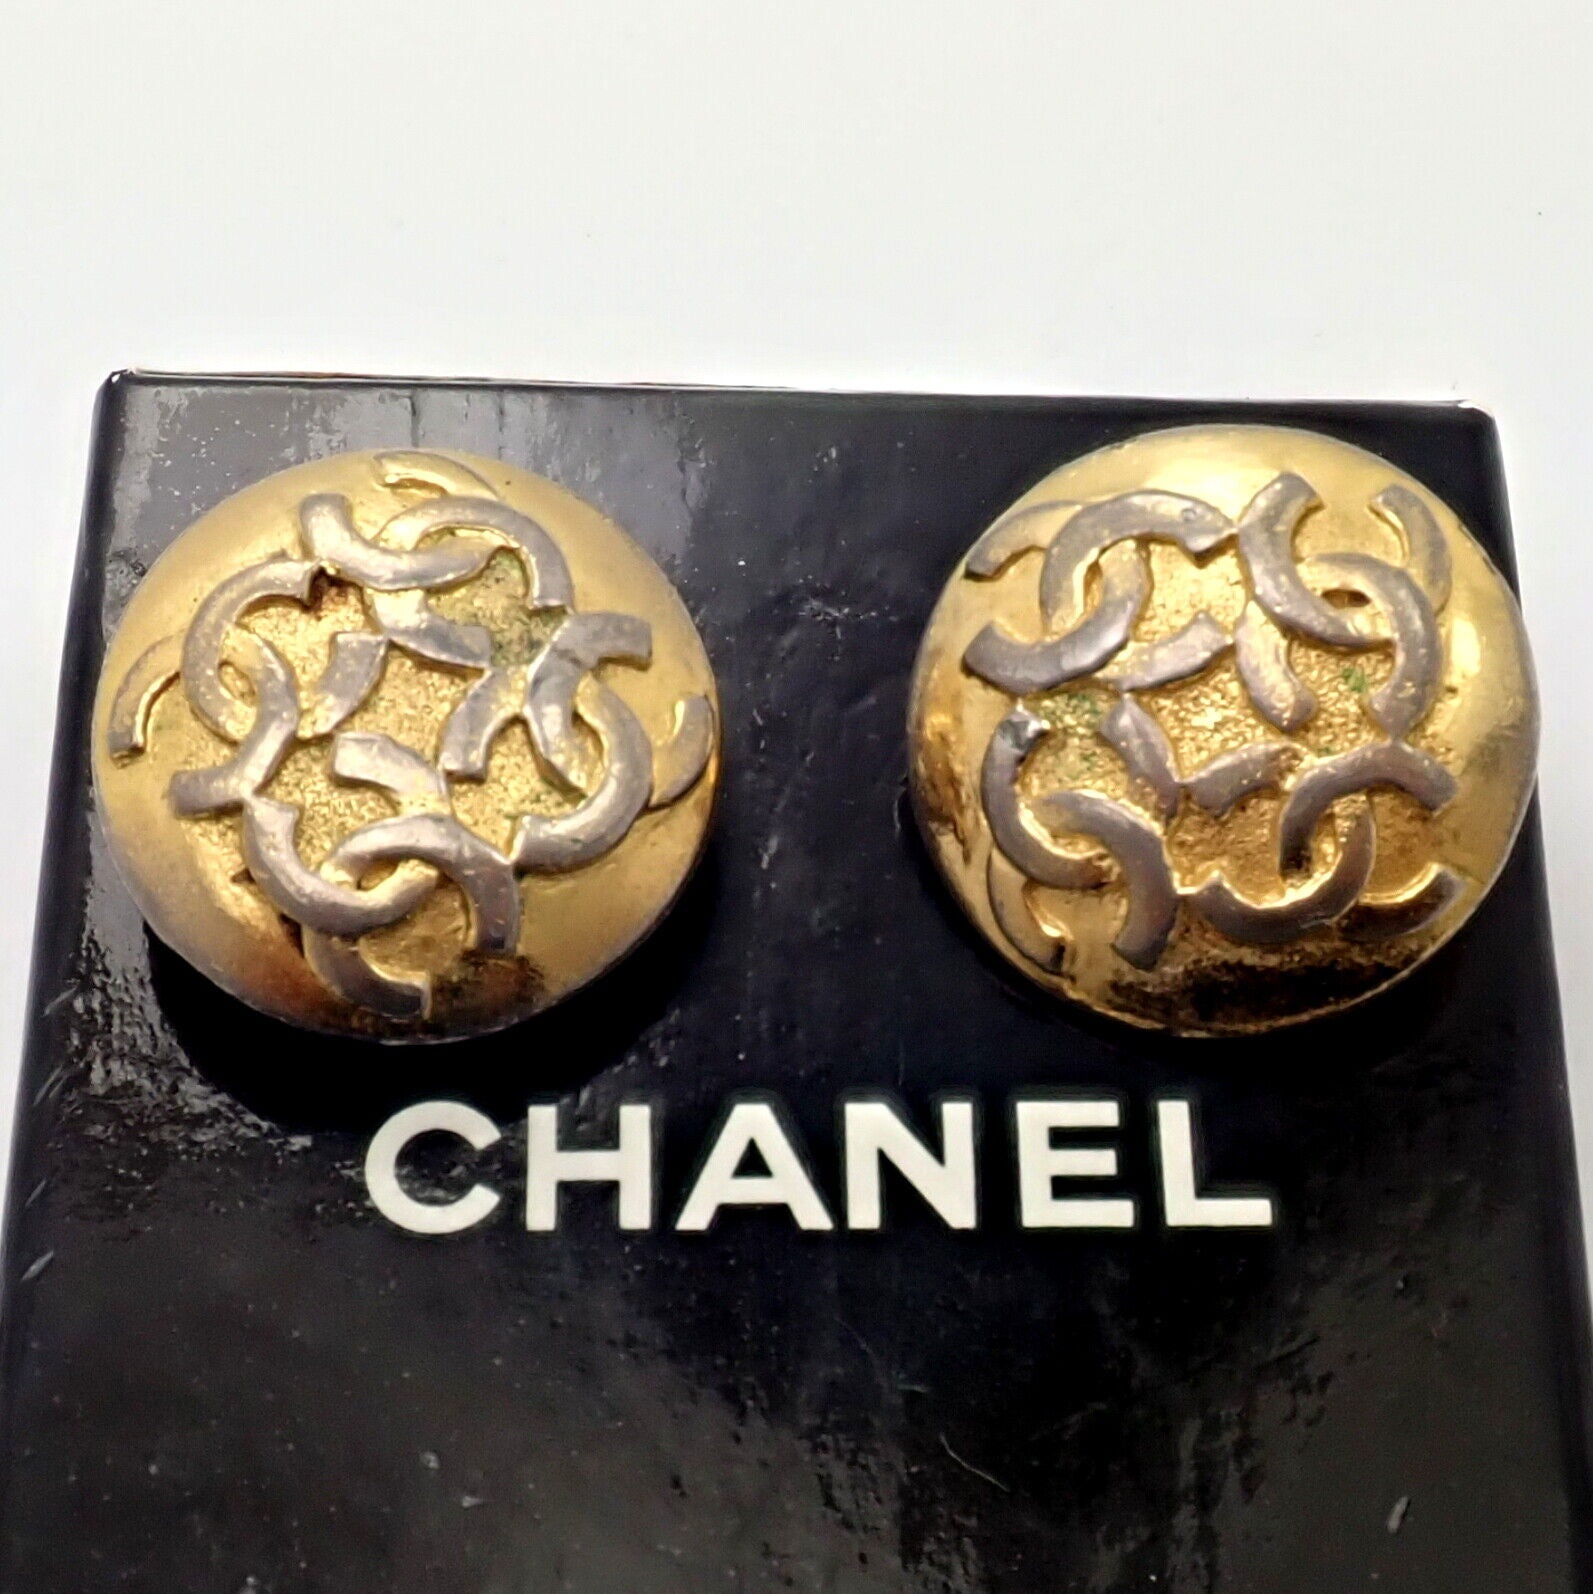 Chanel Jewelry & Watches:Vintage & Antique Jewelry:Earrings Rare! Vintage Chanel Paris France CC Logos Button Earrings Early 1980's